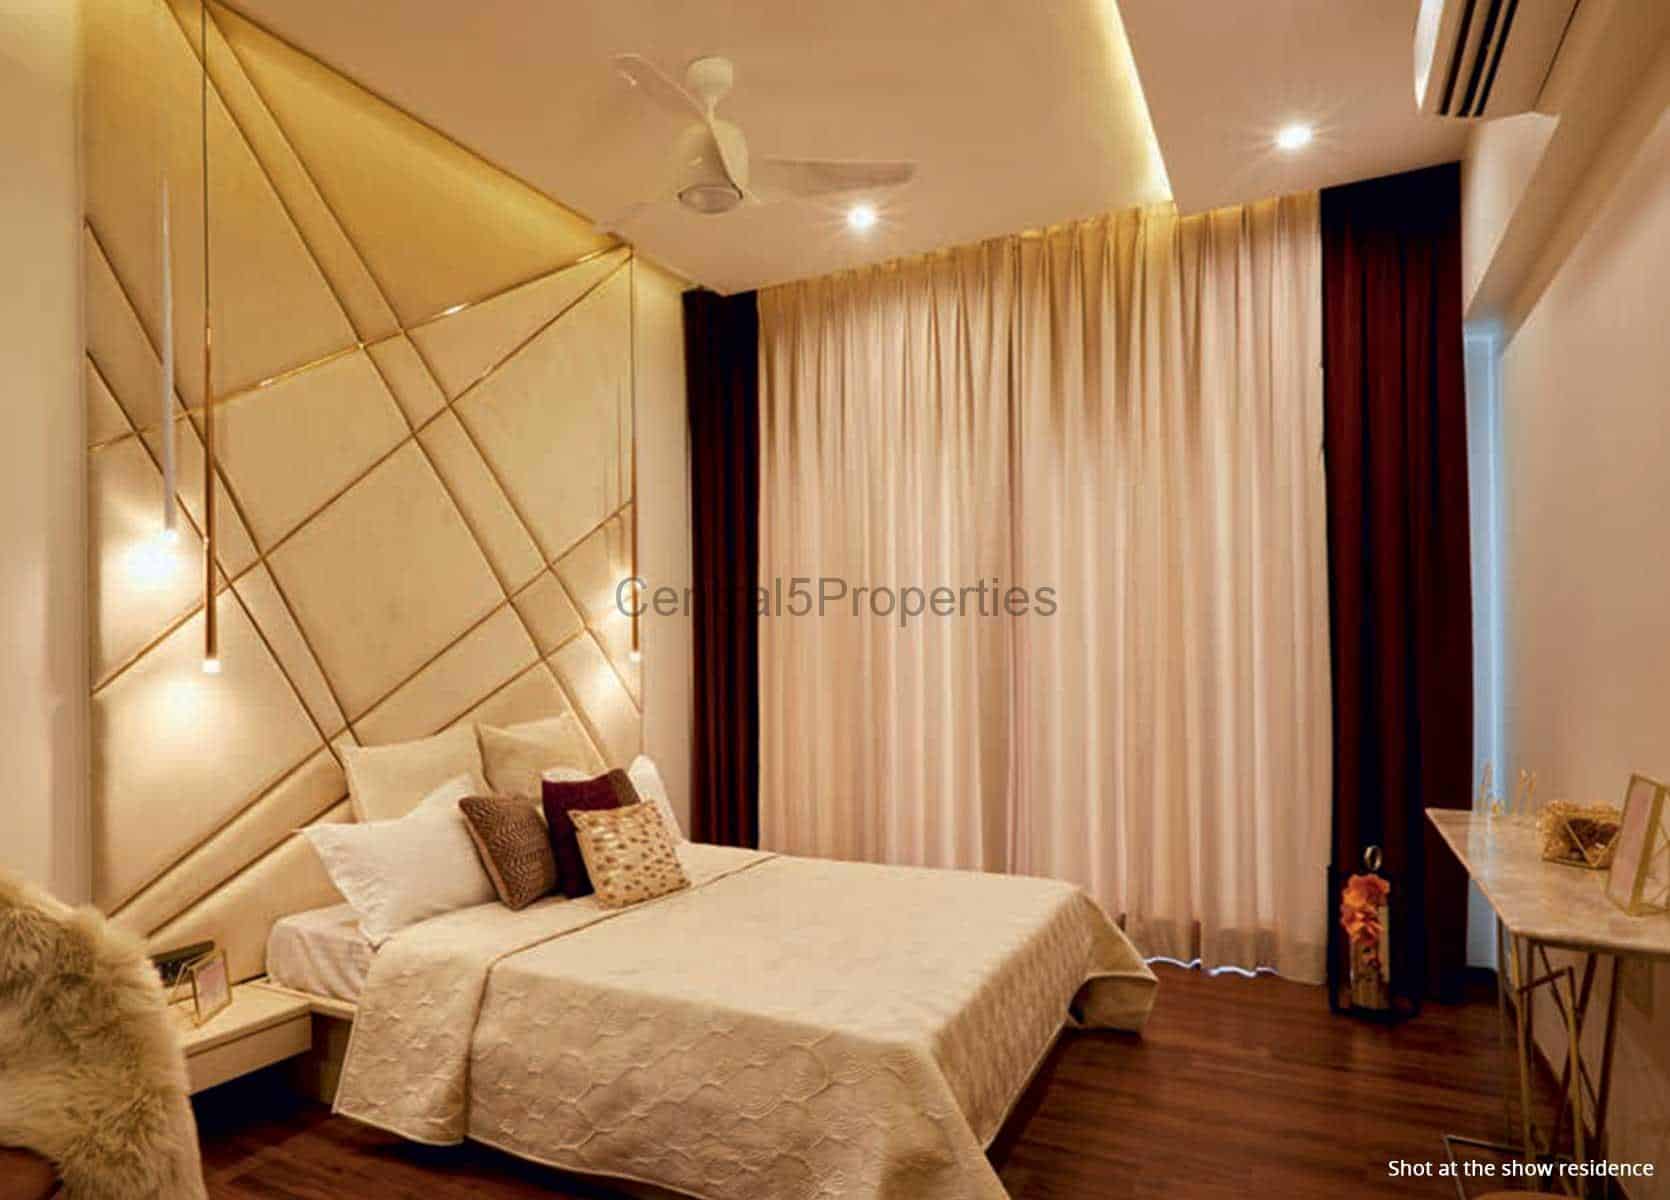 Real Estate in Pimple Nilakh Pune